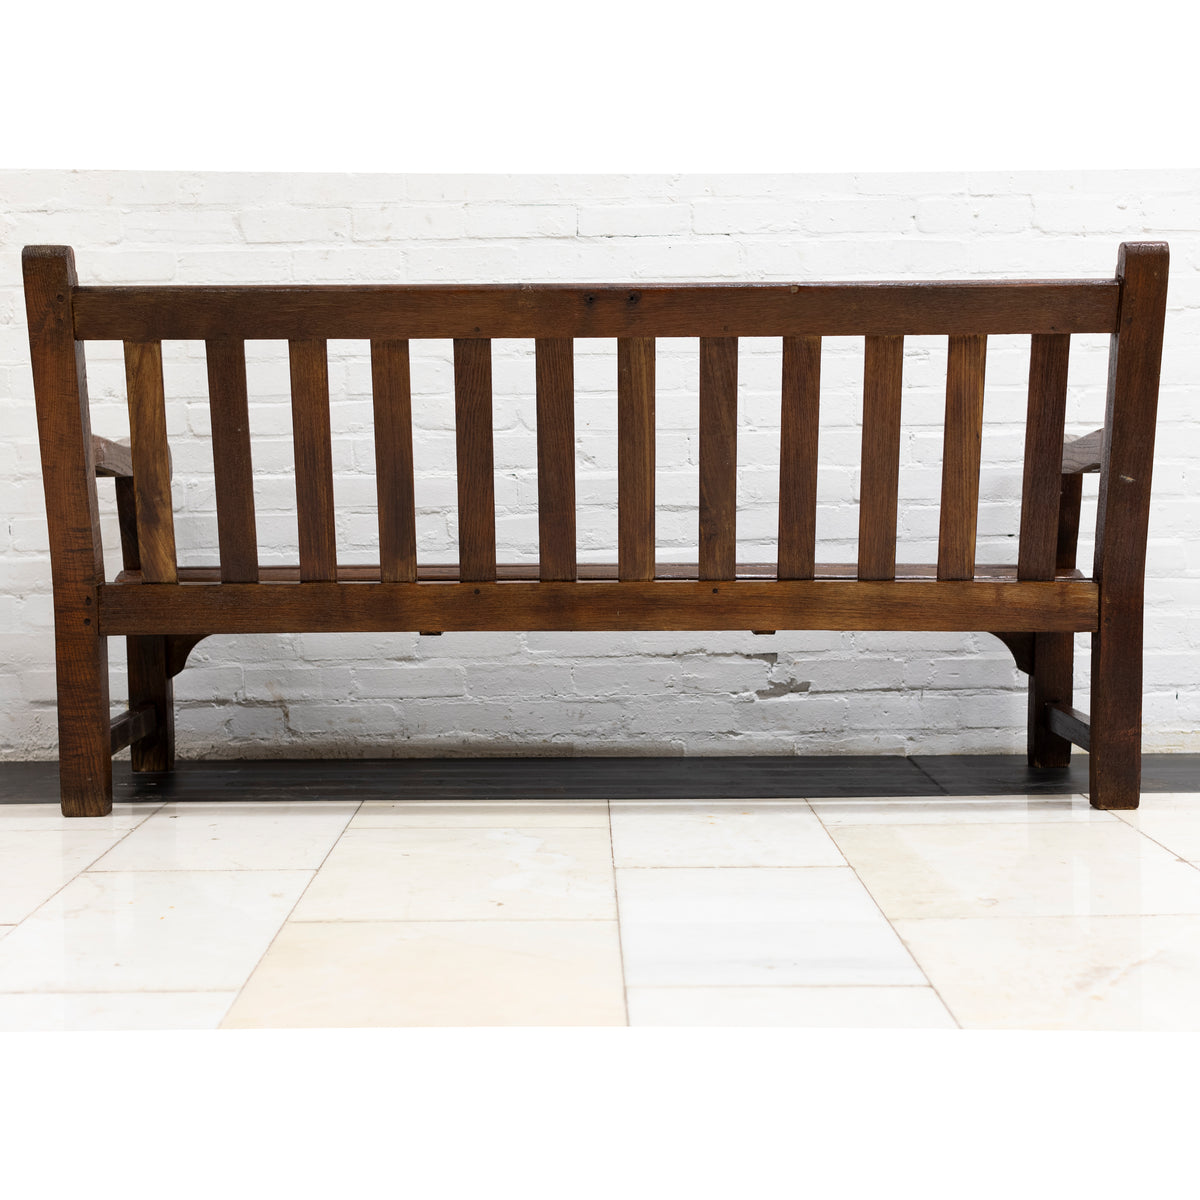 Reclaimed Lister Teak Bench | The Architectural Forum